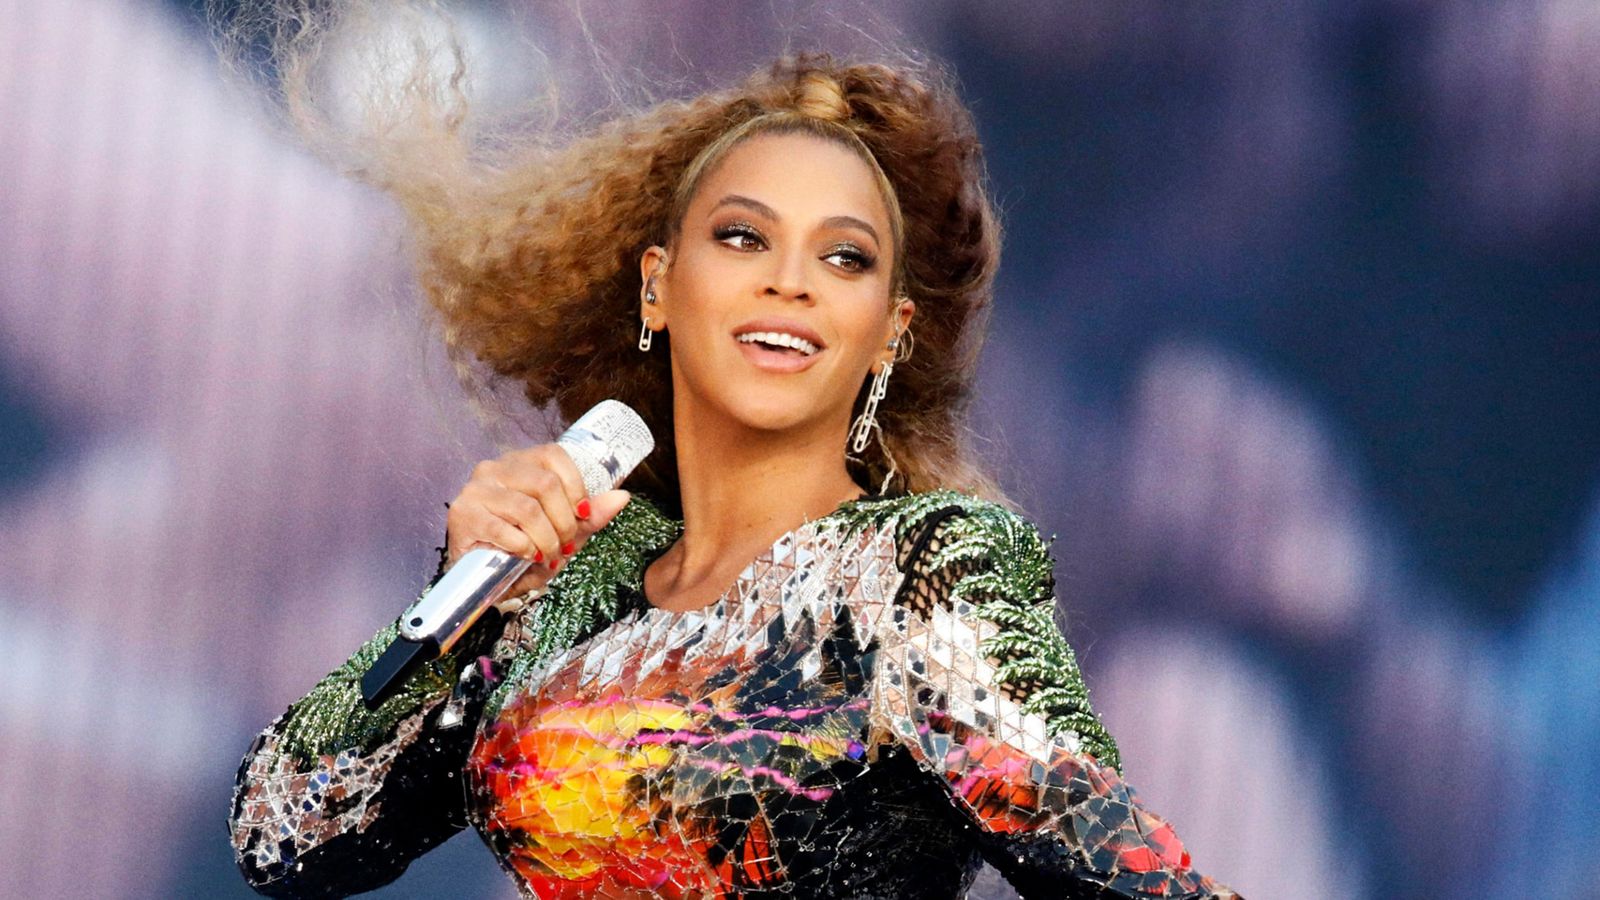 Beyonce fans scramble for Renaissance tickets as sellers warn availability is already 'extremely limited'